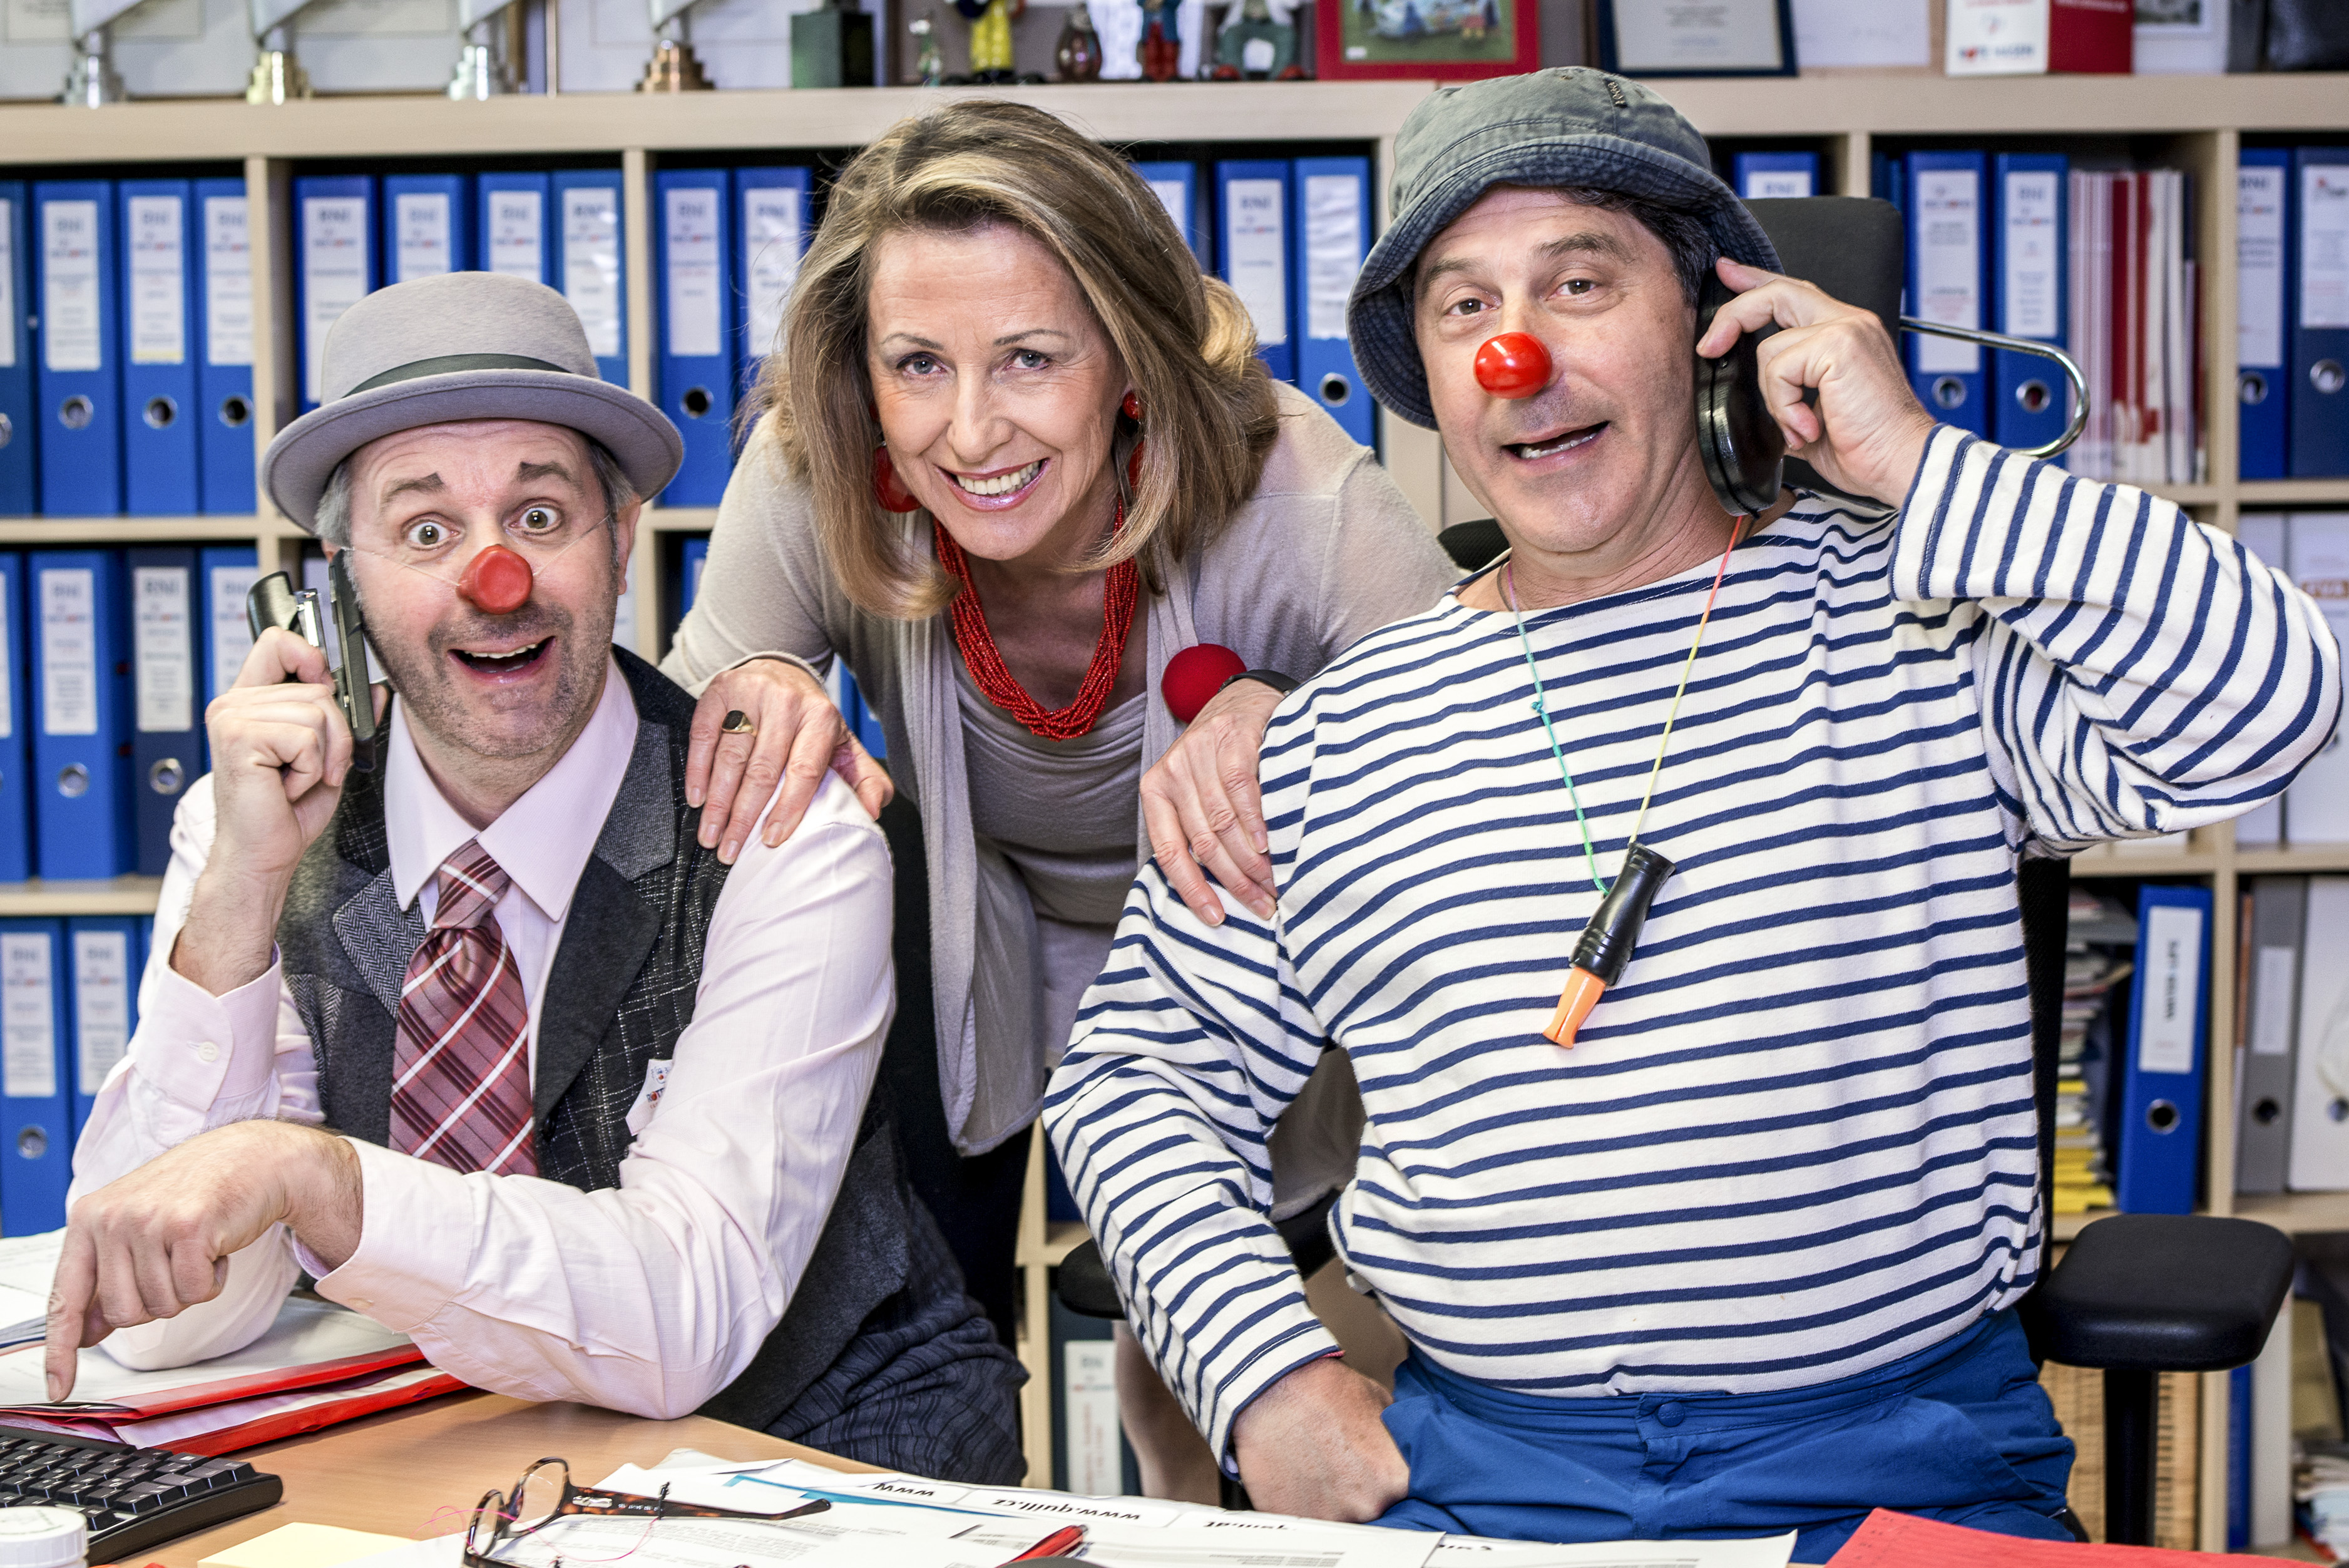 Monica Culen with RED NOSES clowns